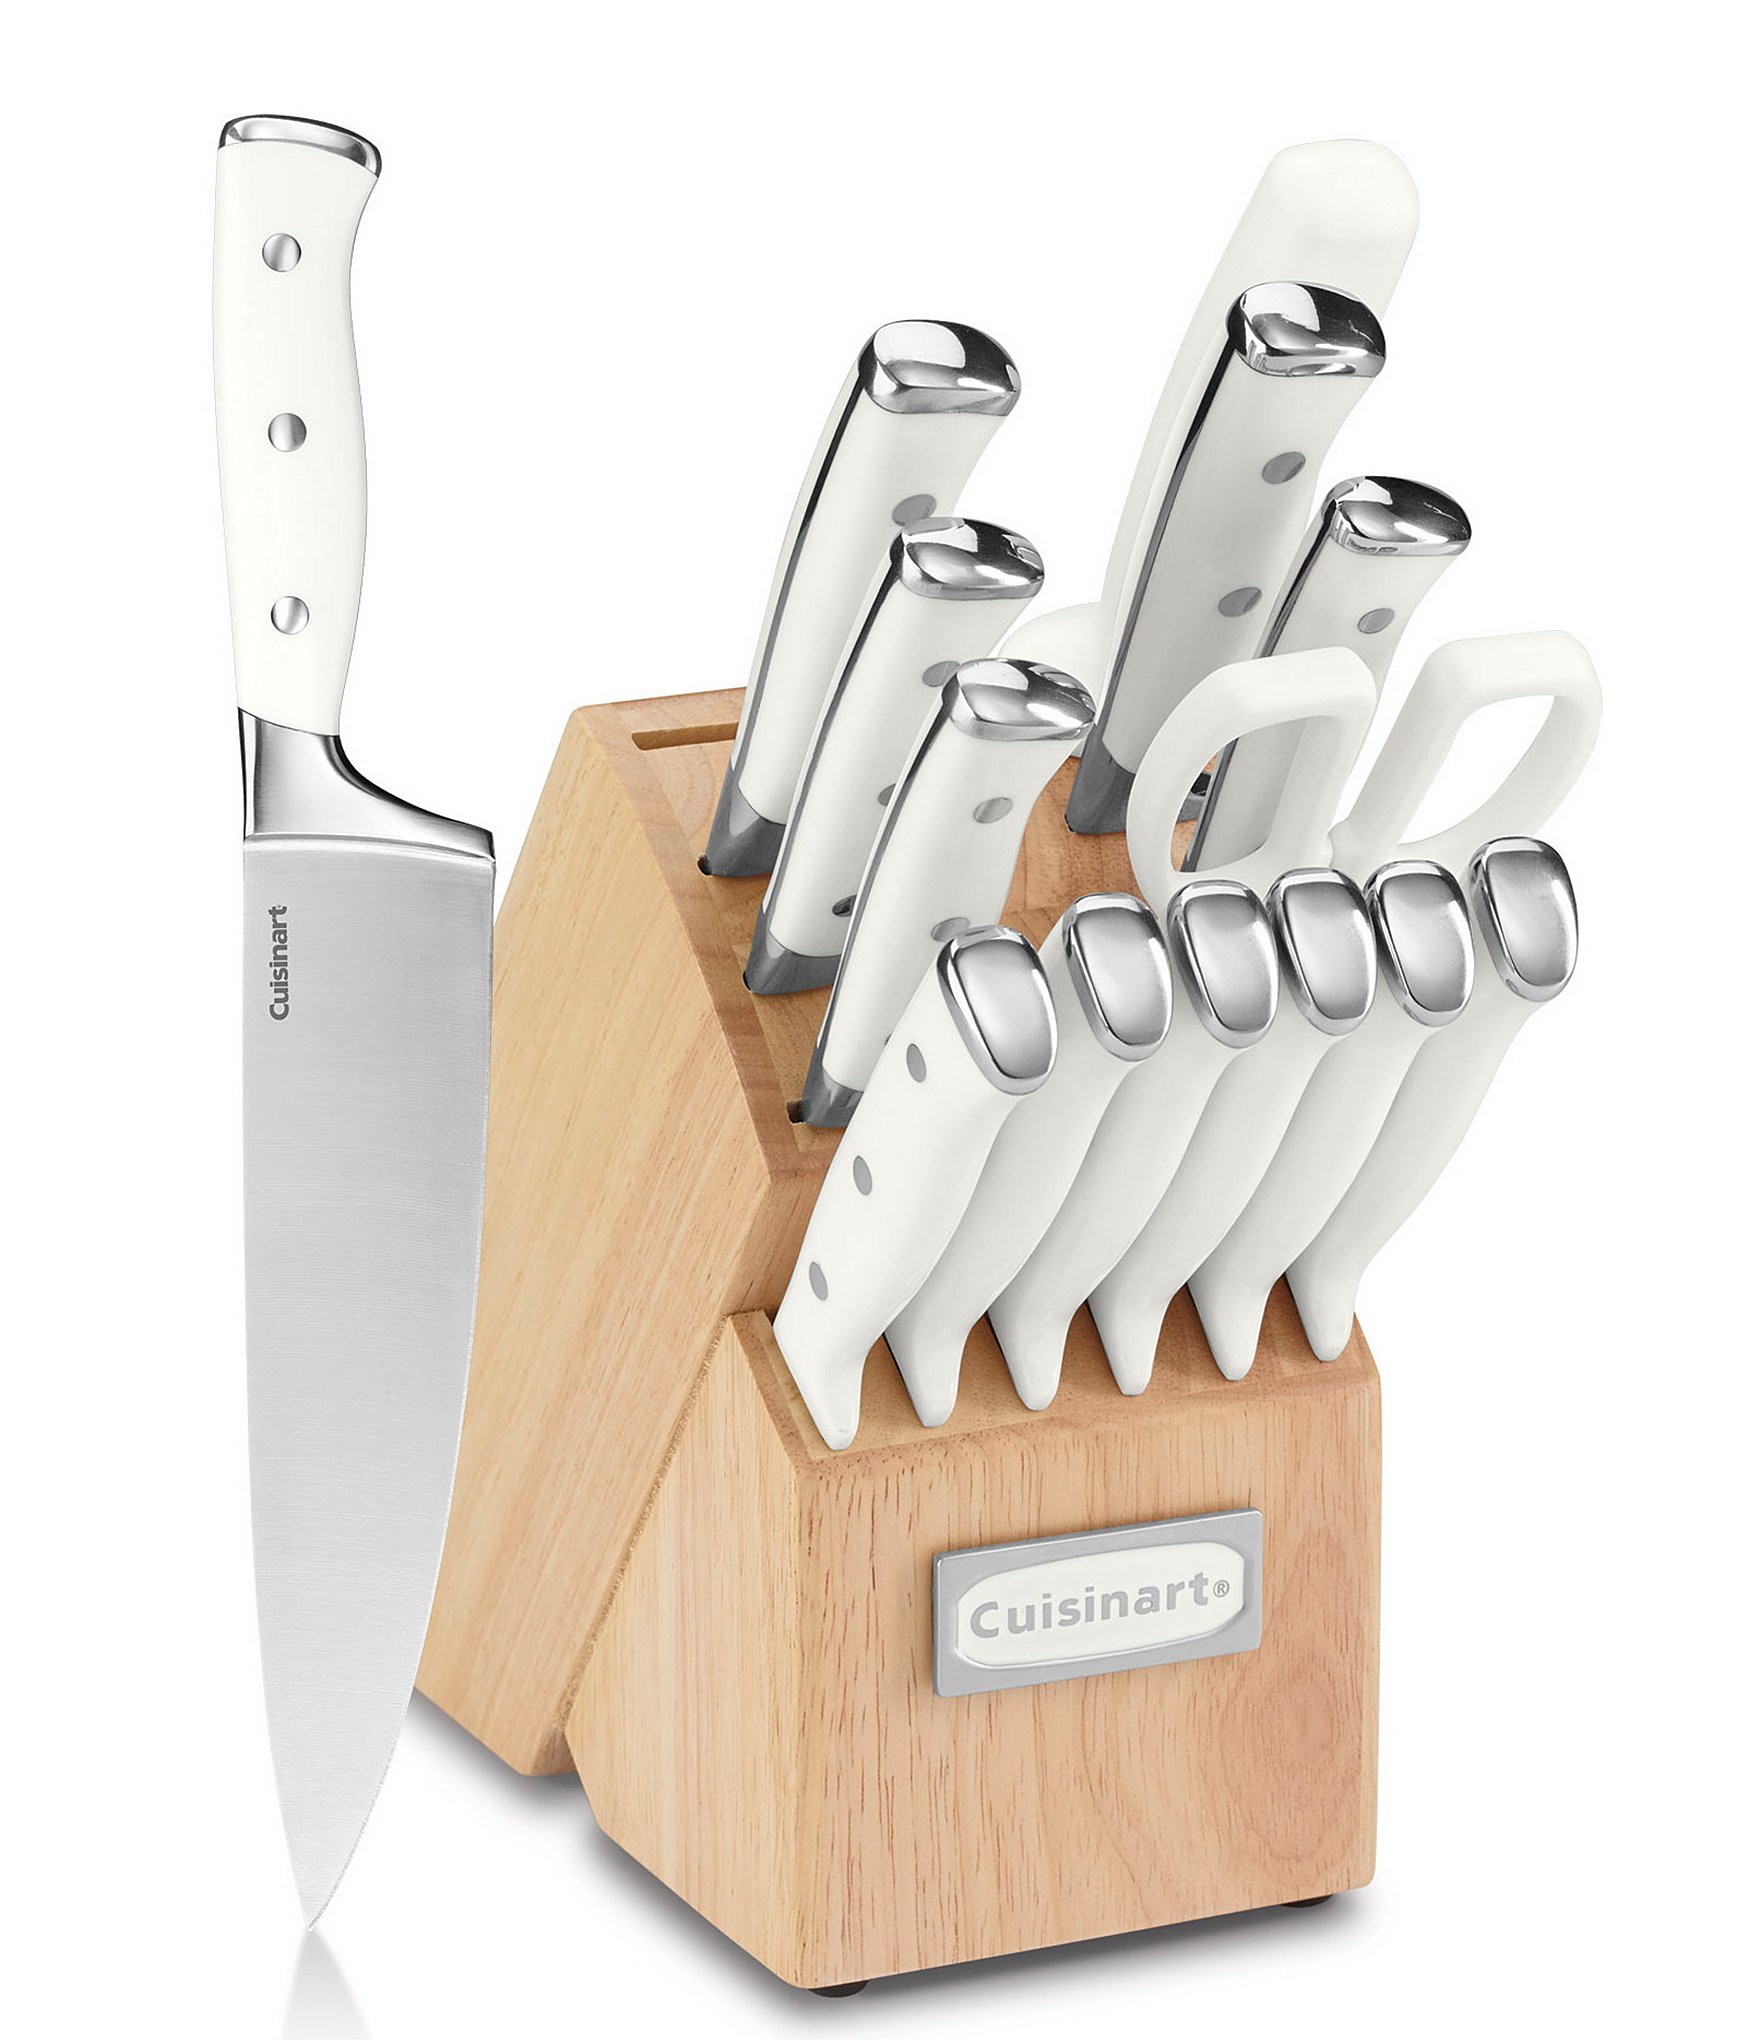 Cuisinart 15-Piece Triple Rivet Block Set - High-Carbon Stainless Steel  Blades, Plastic Handles, Dishwasher Safe - Includes Chef, Bread, Santoku,  Utility, Paring Knives in the Cutlery department at